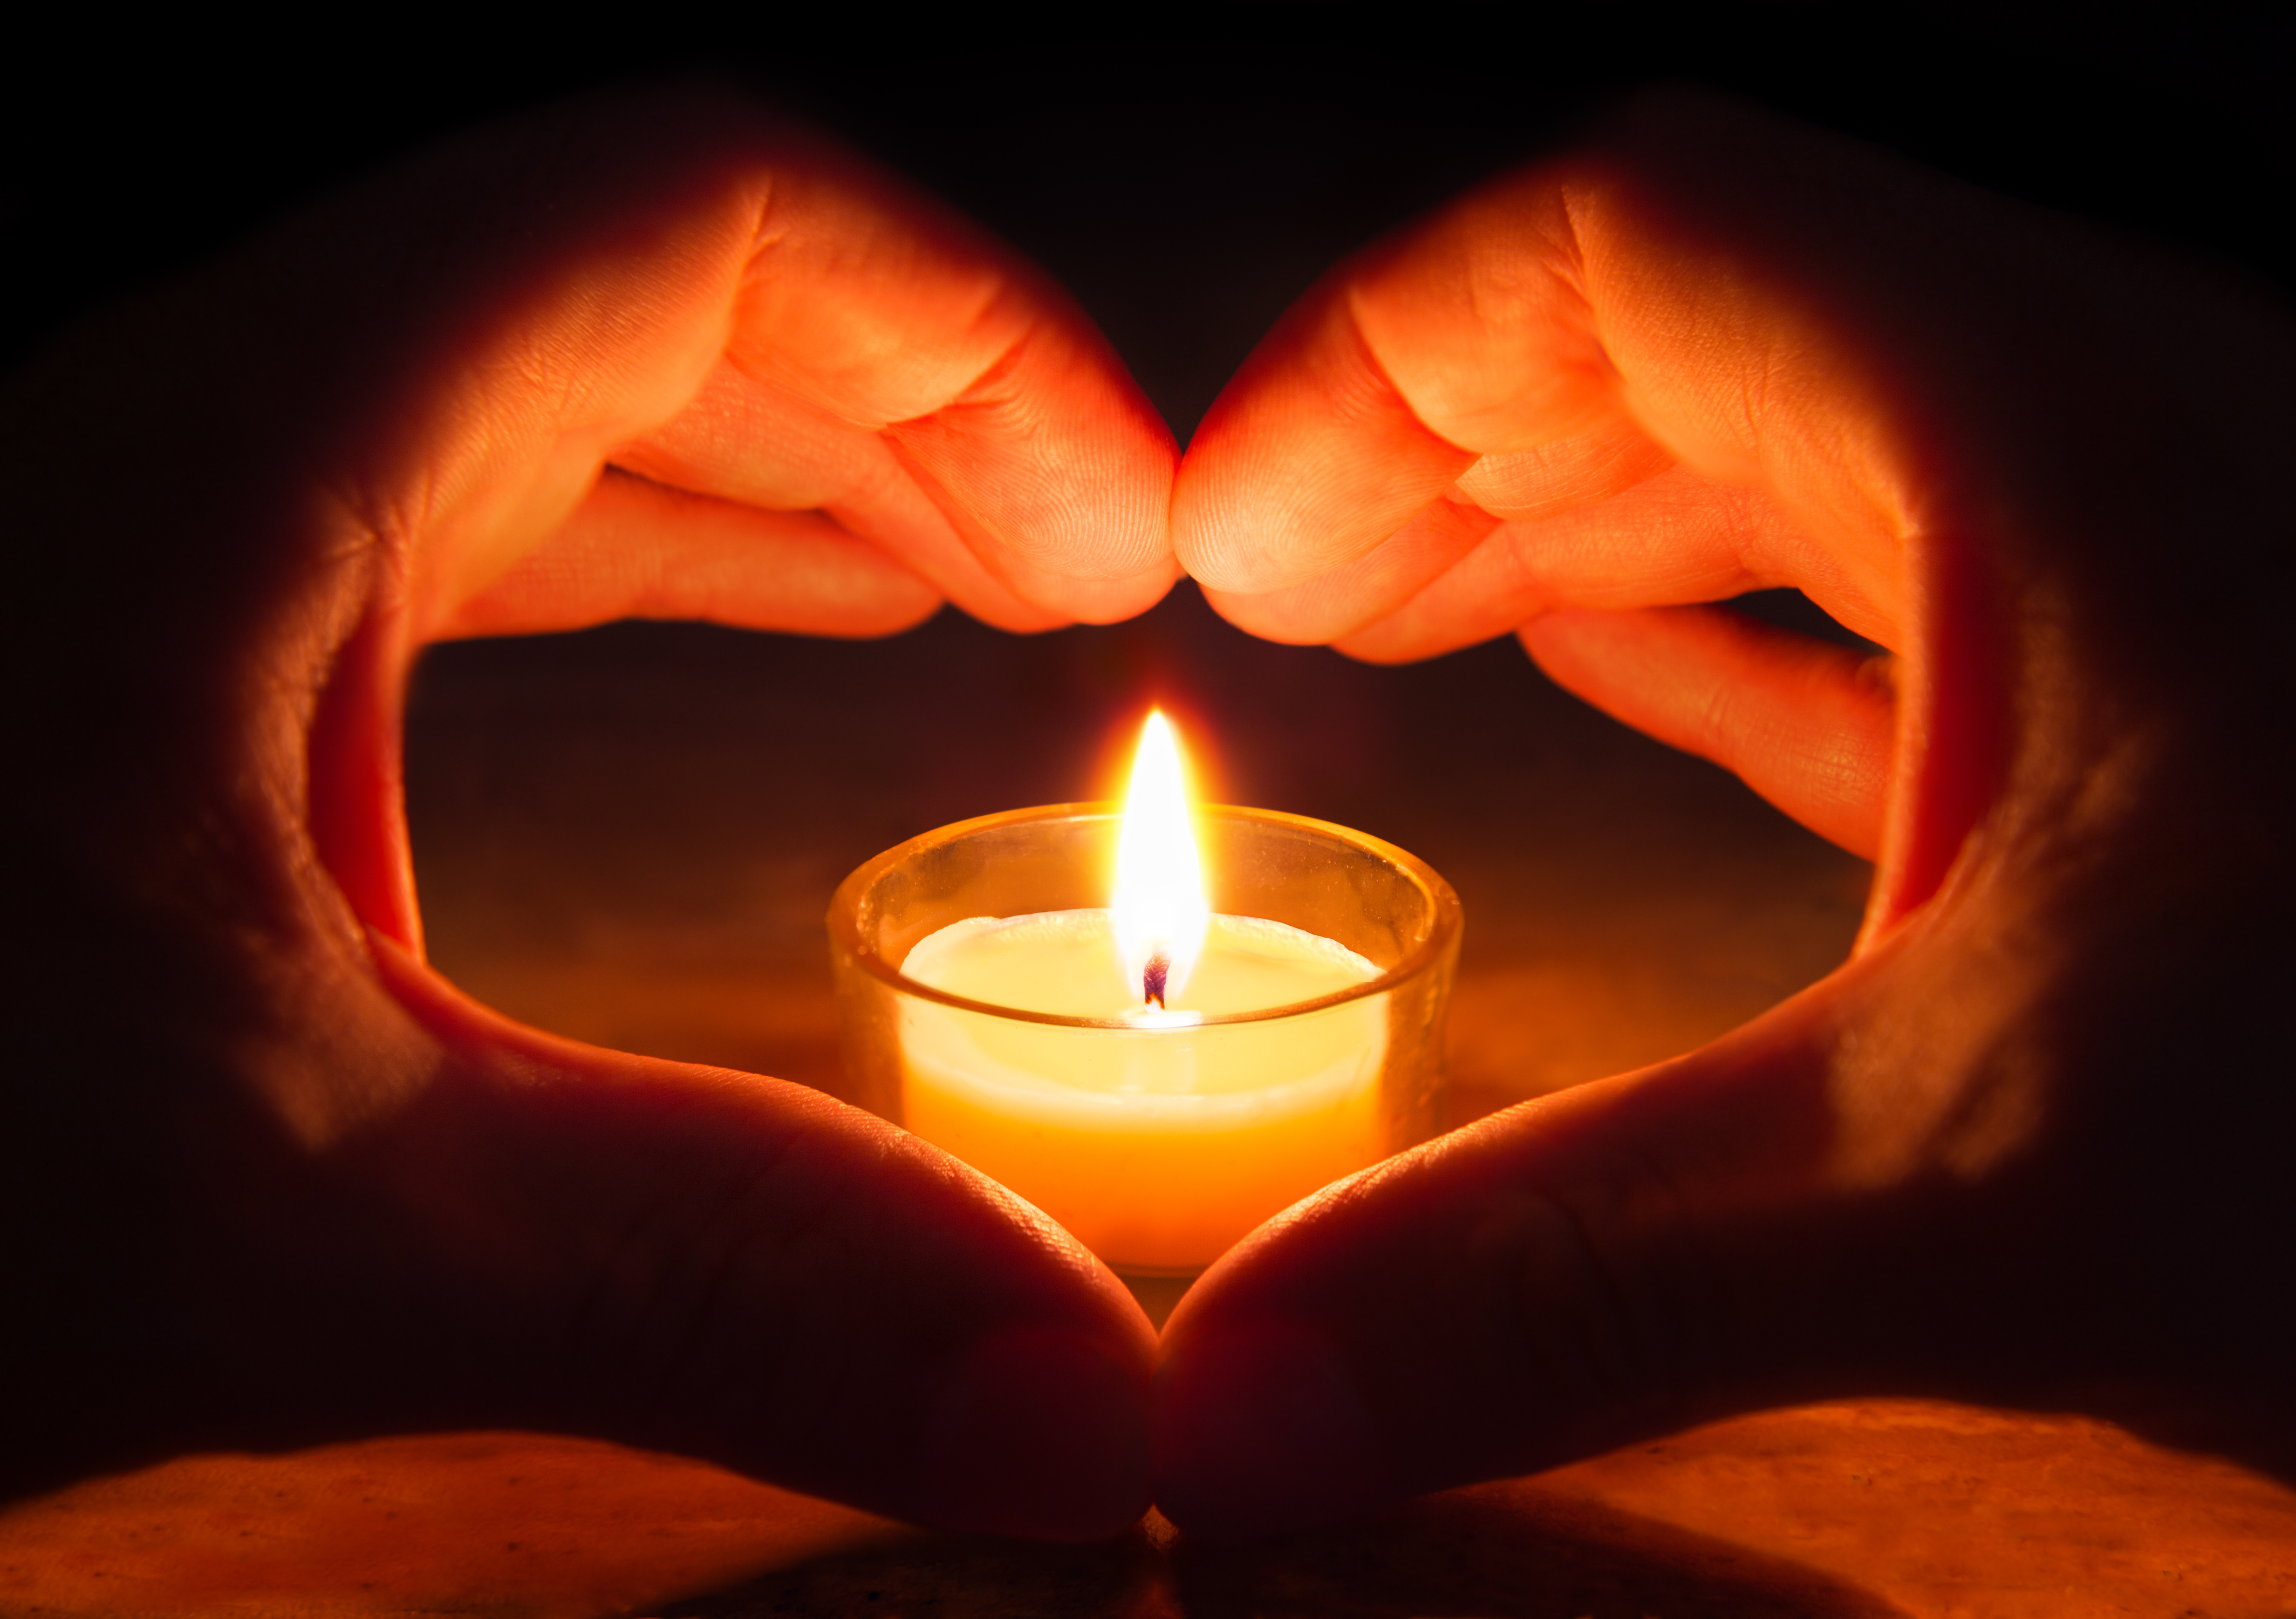 Hands forming heart around a candle